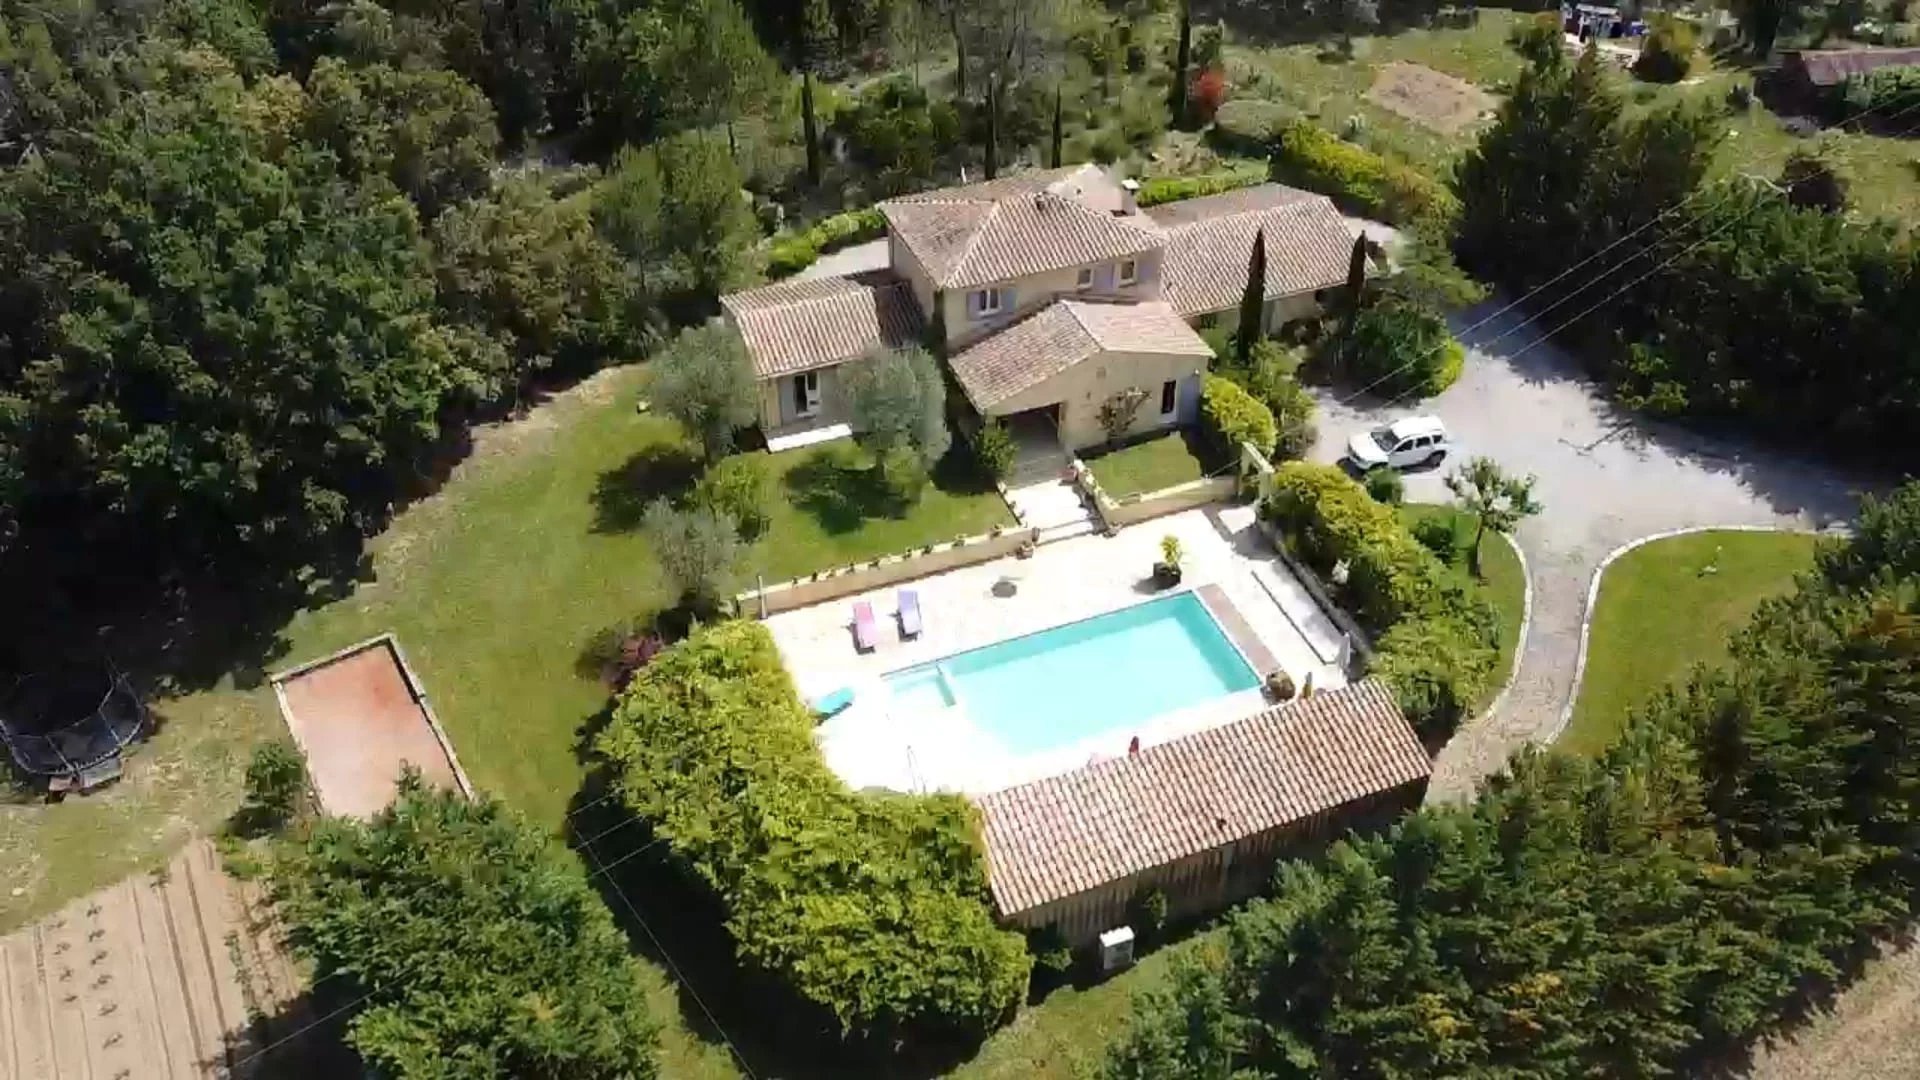 VILLA WITH POOL AND PLOT OF 1 HECTARE AT BRIGNOLES CENTRE VAR